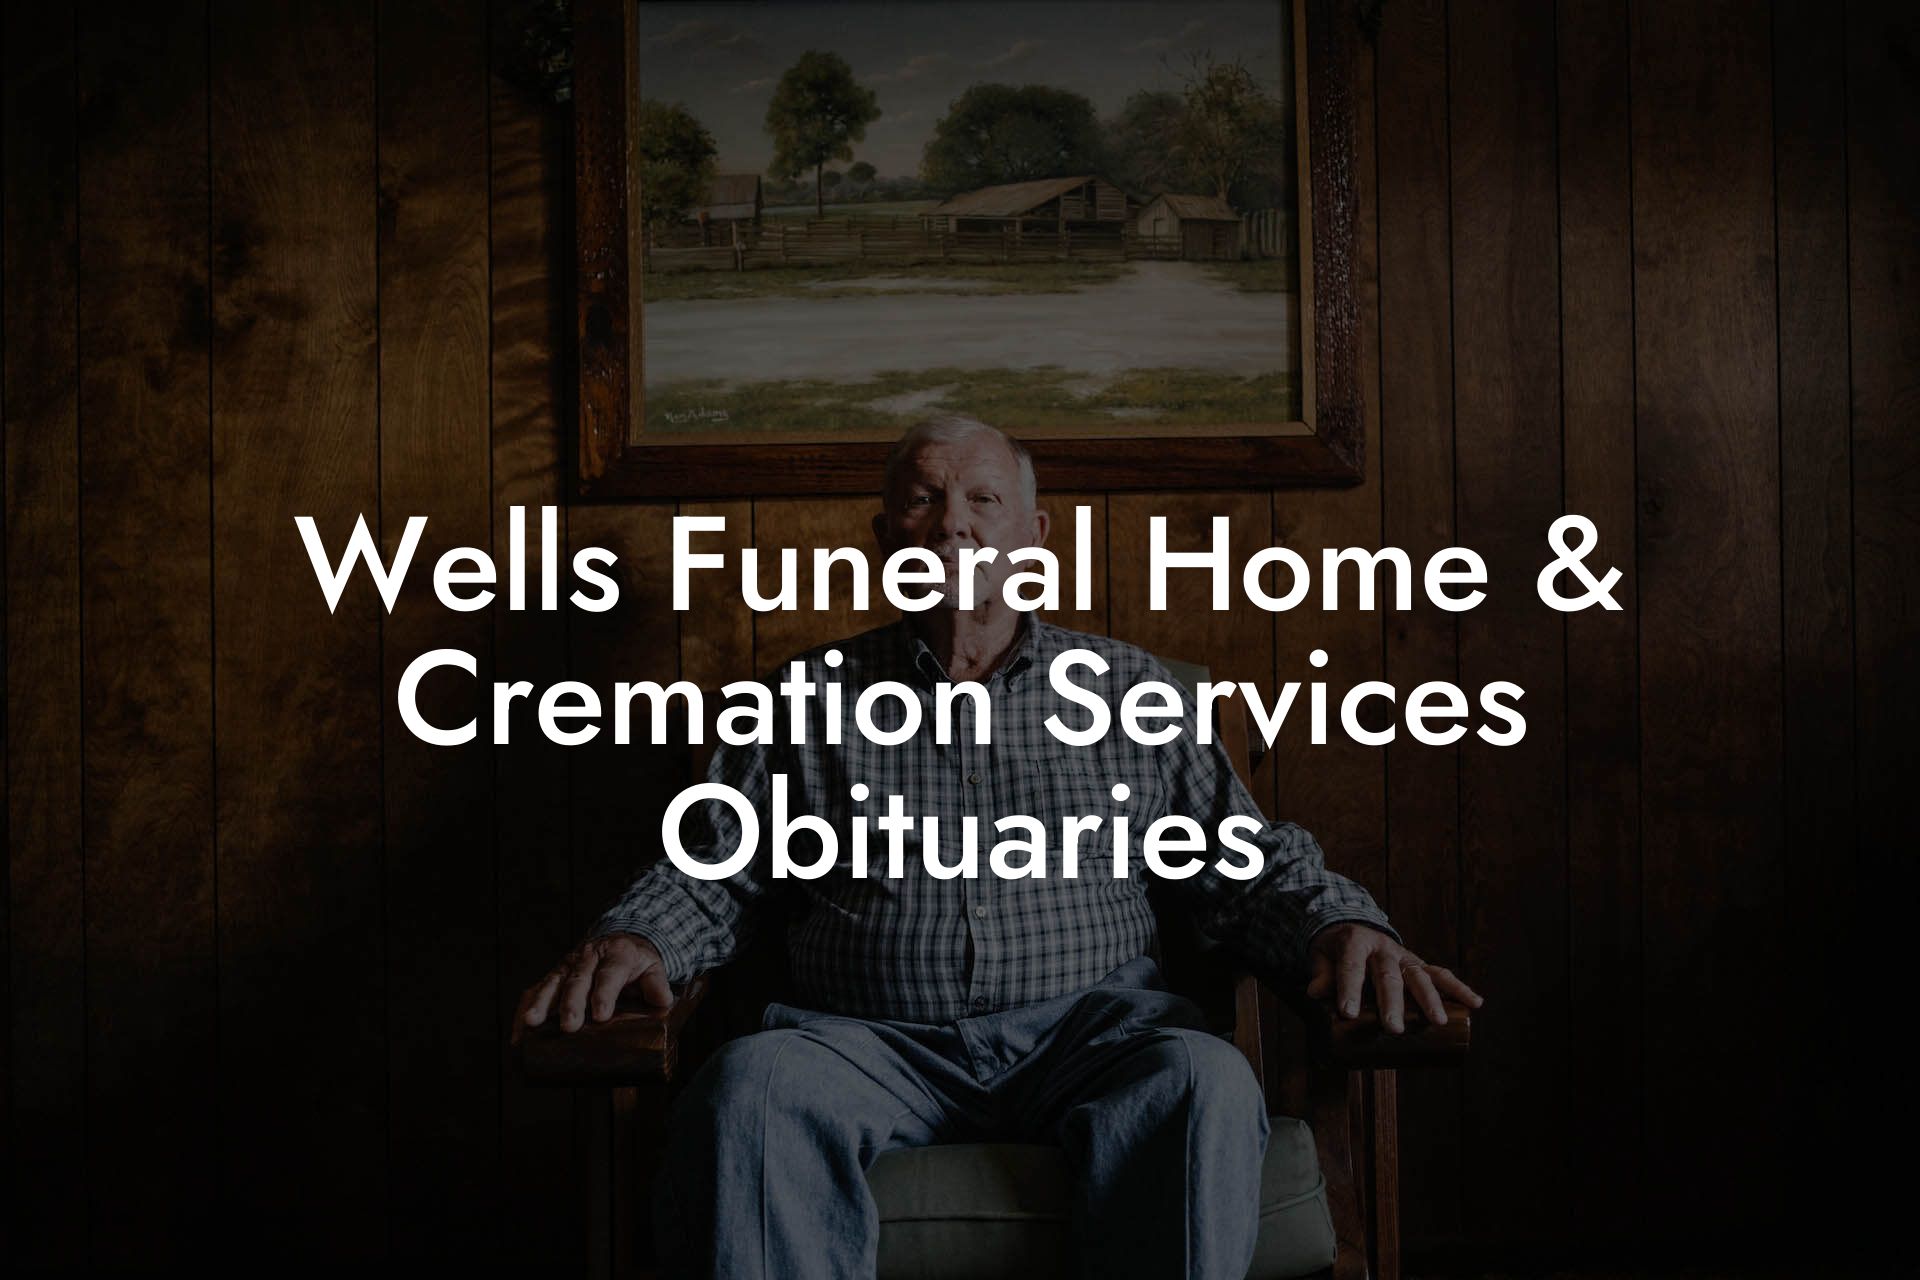 Wells Funeral Home & Cremation Services Obituaries